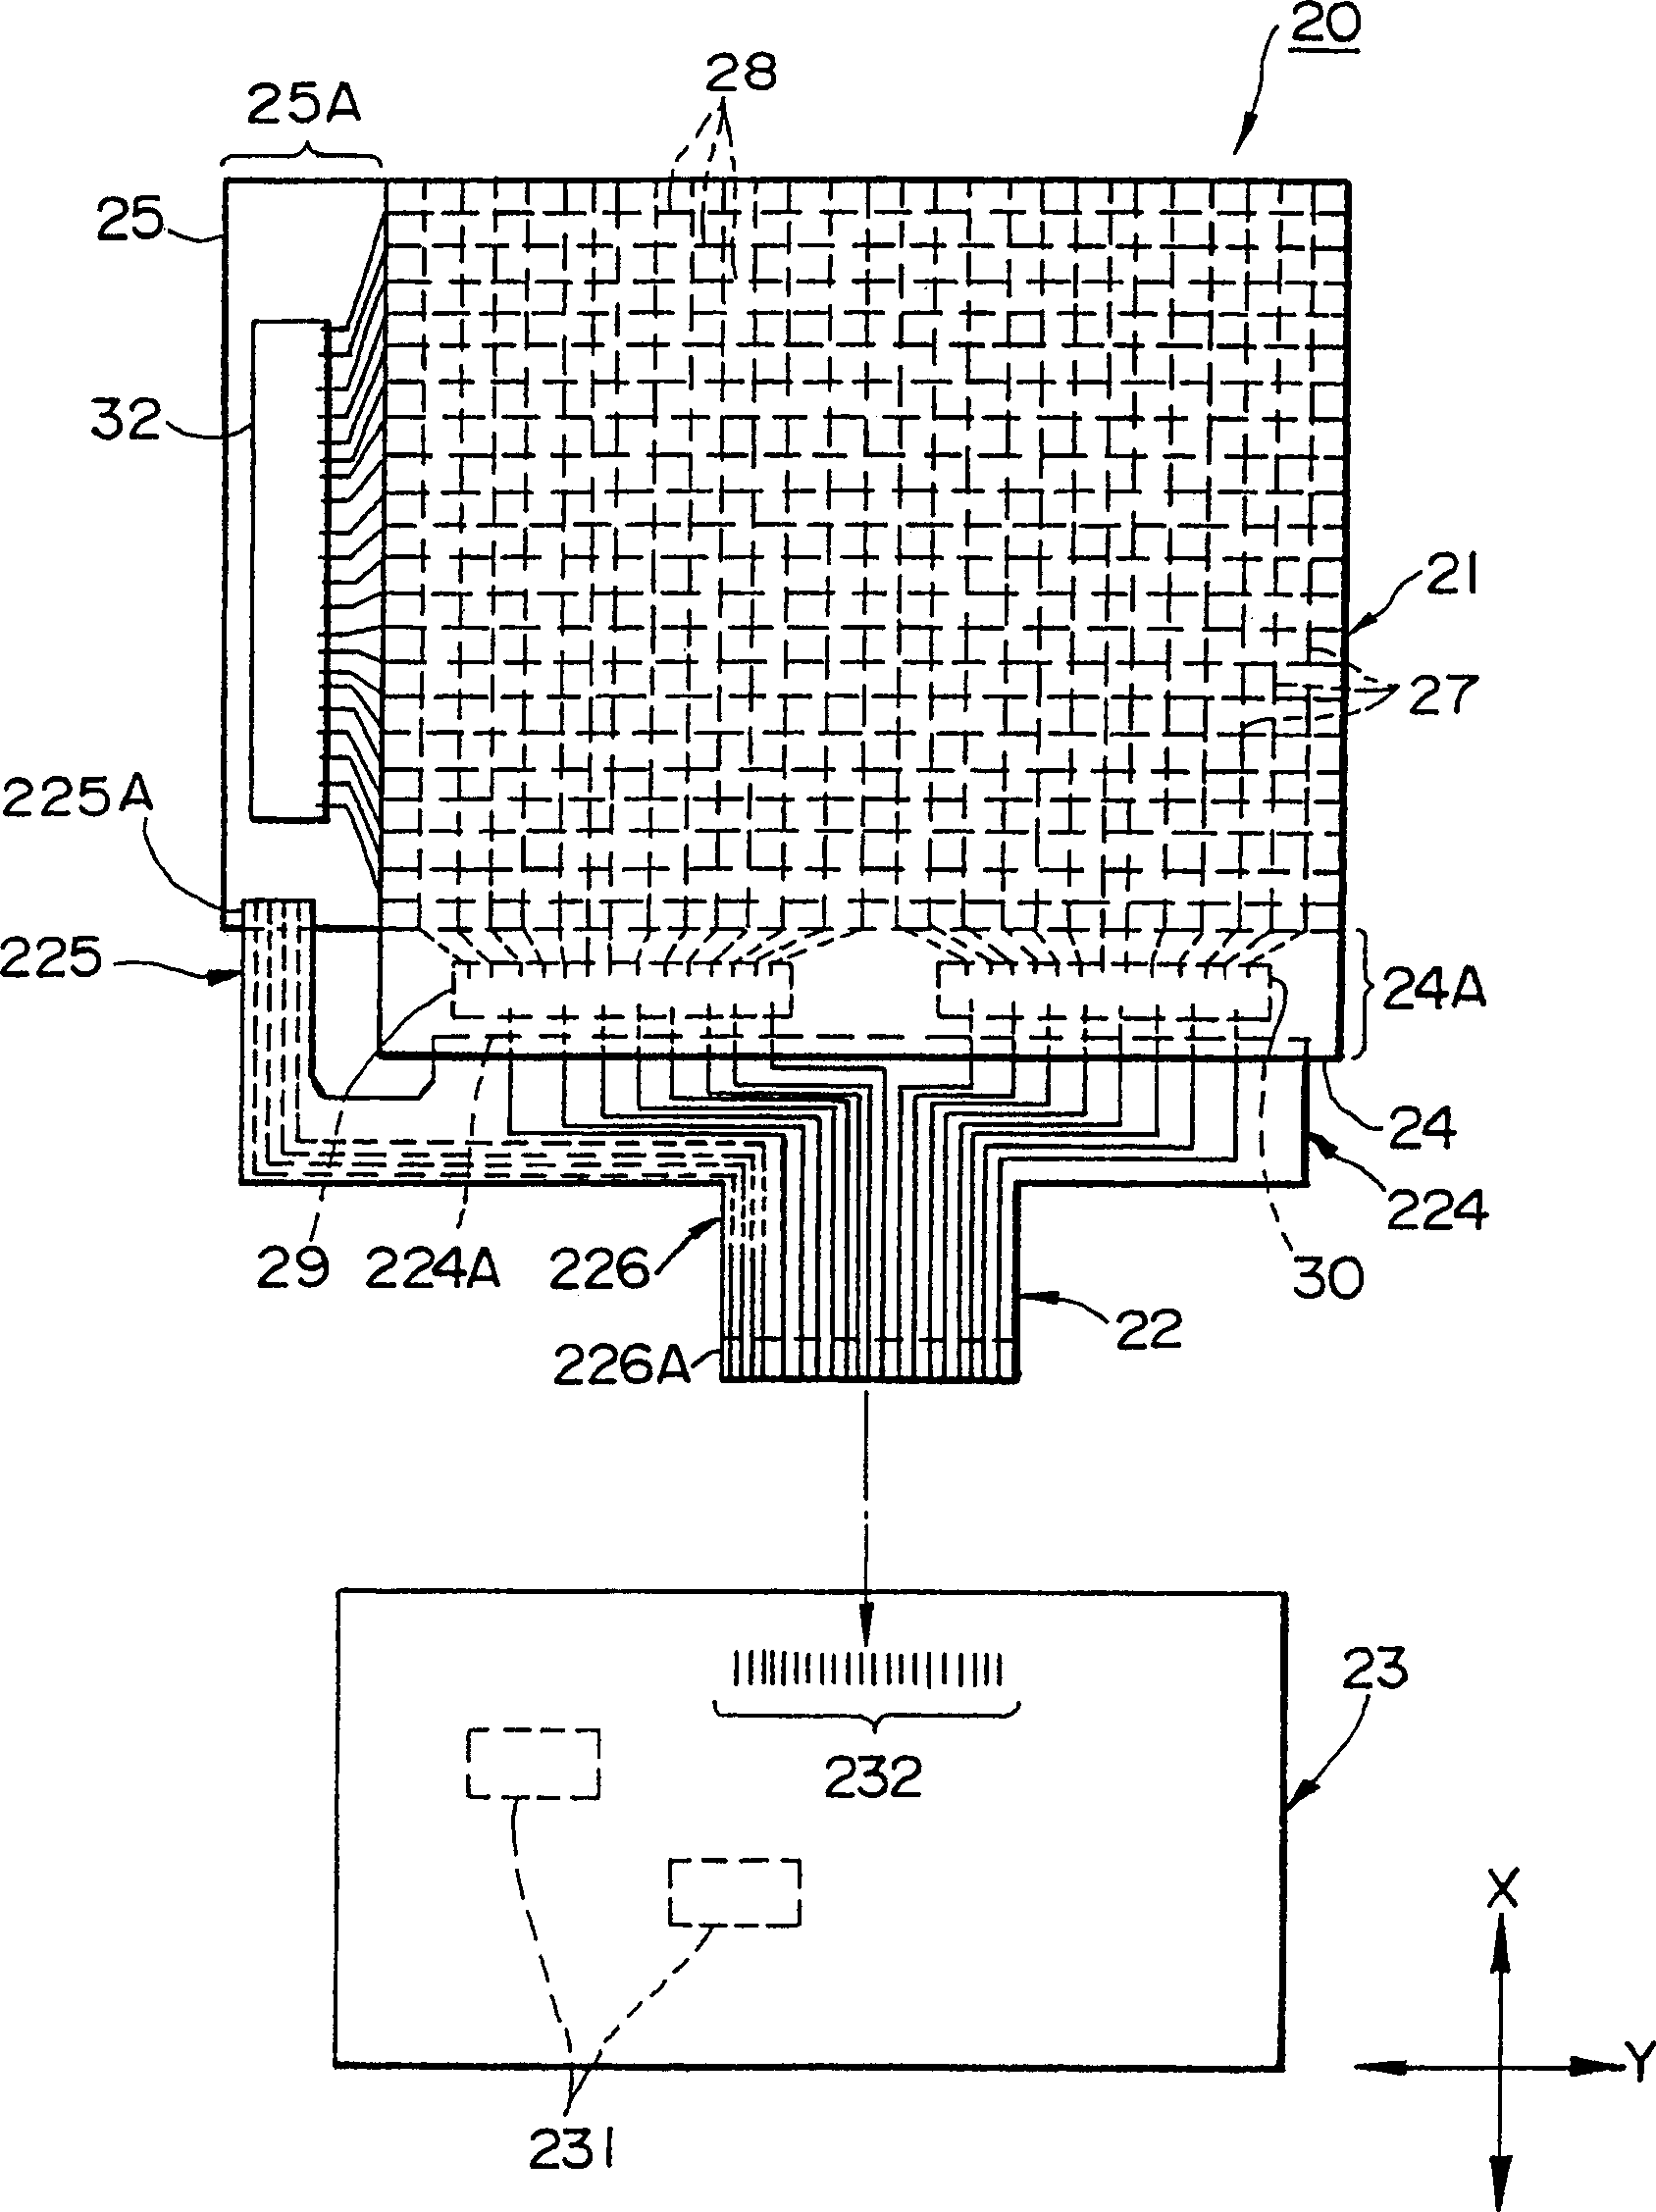 Flexible printing wiring substrate, electrooptics arrangement, and electronic device